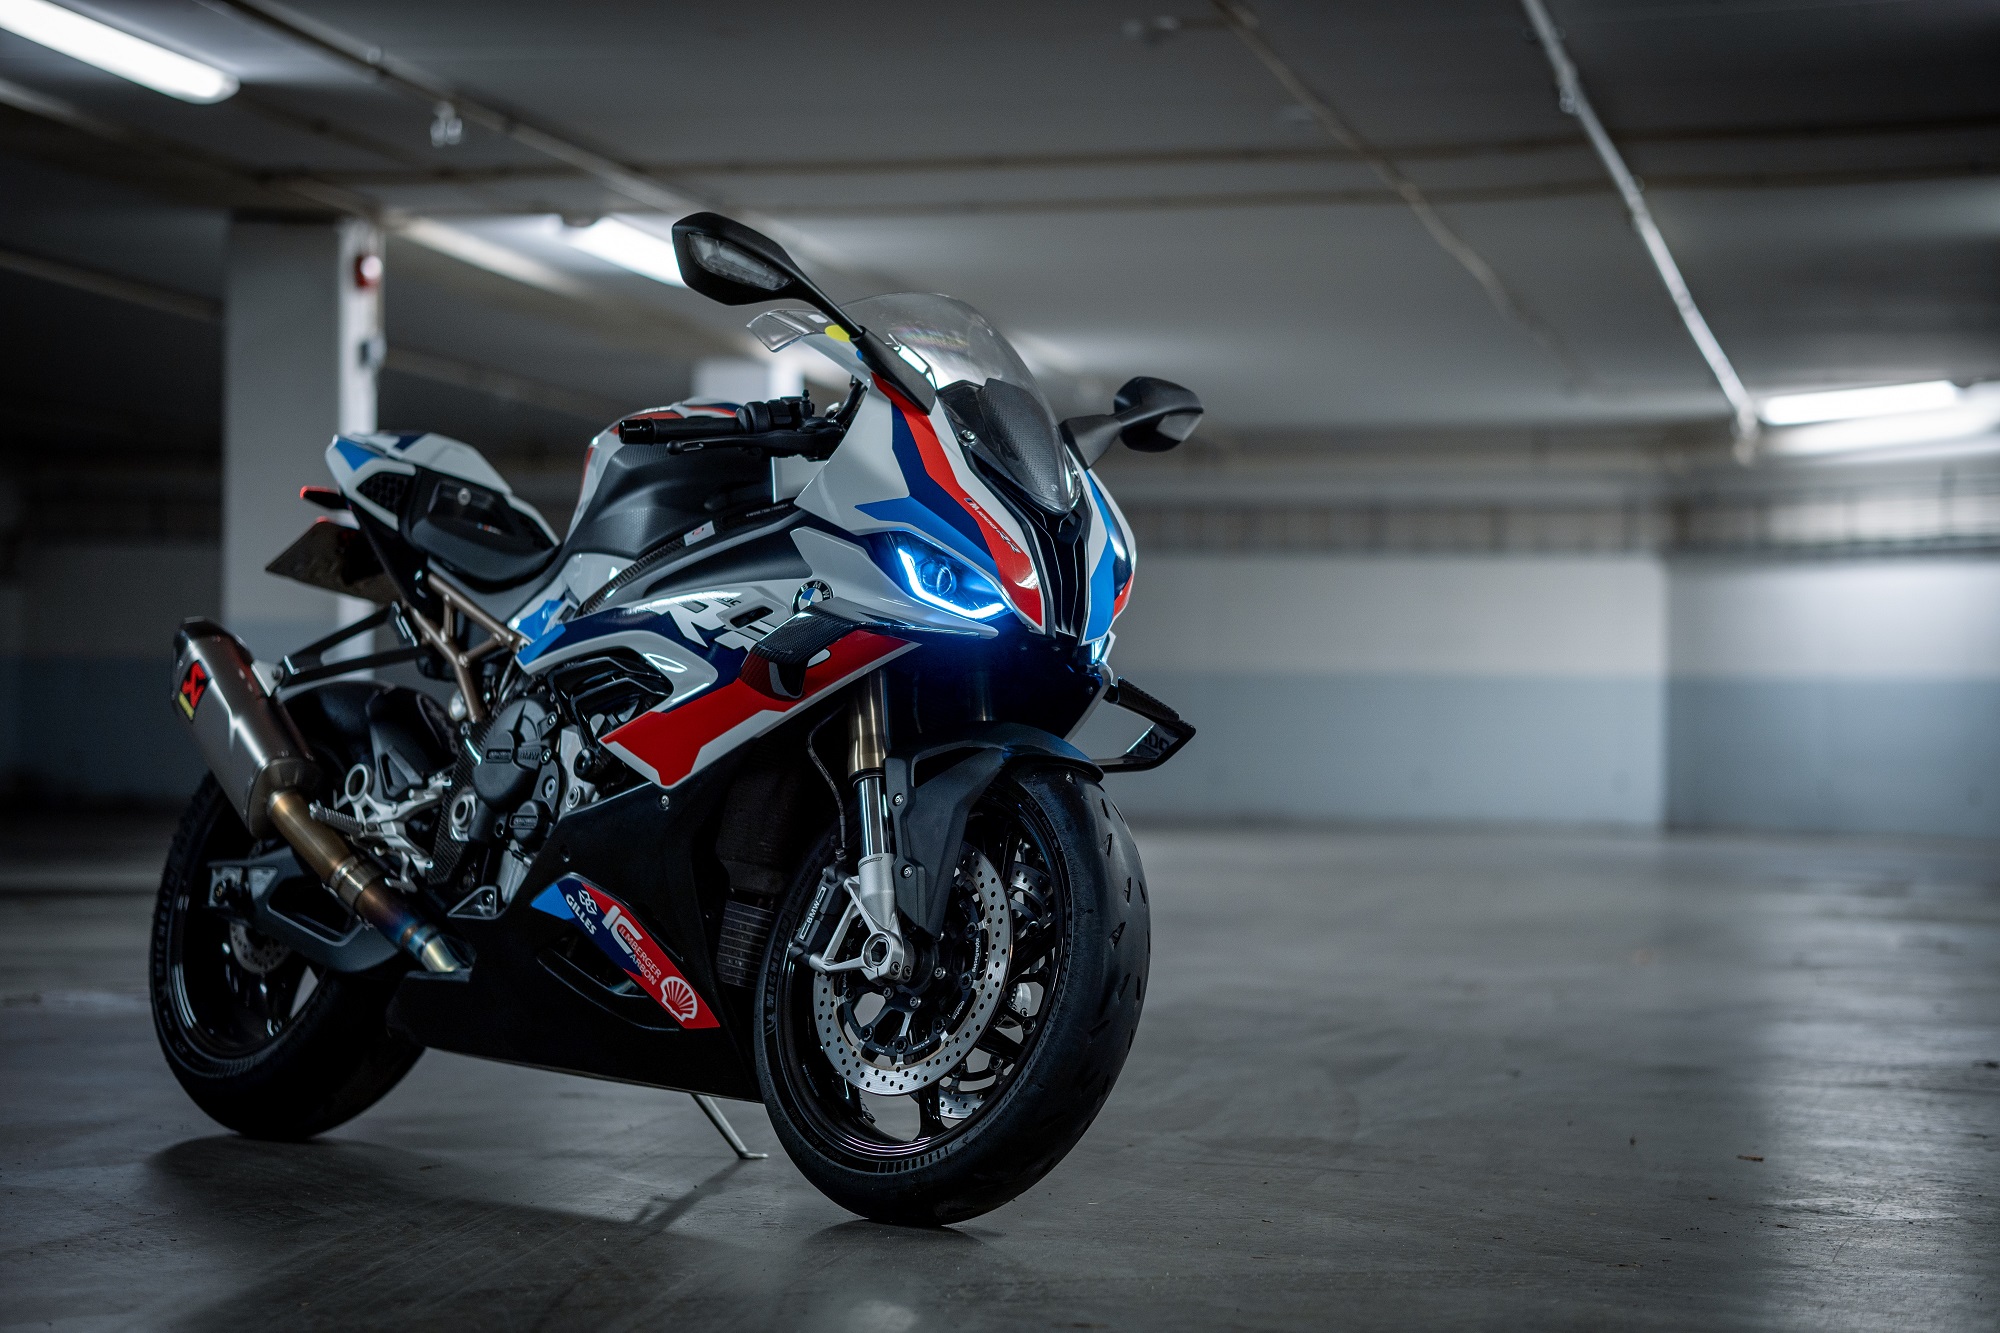 BMW S1000RR is one of the hardcore sportsbikes with more horsepower than a Mazda MX-5 Miata.